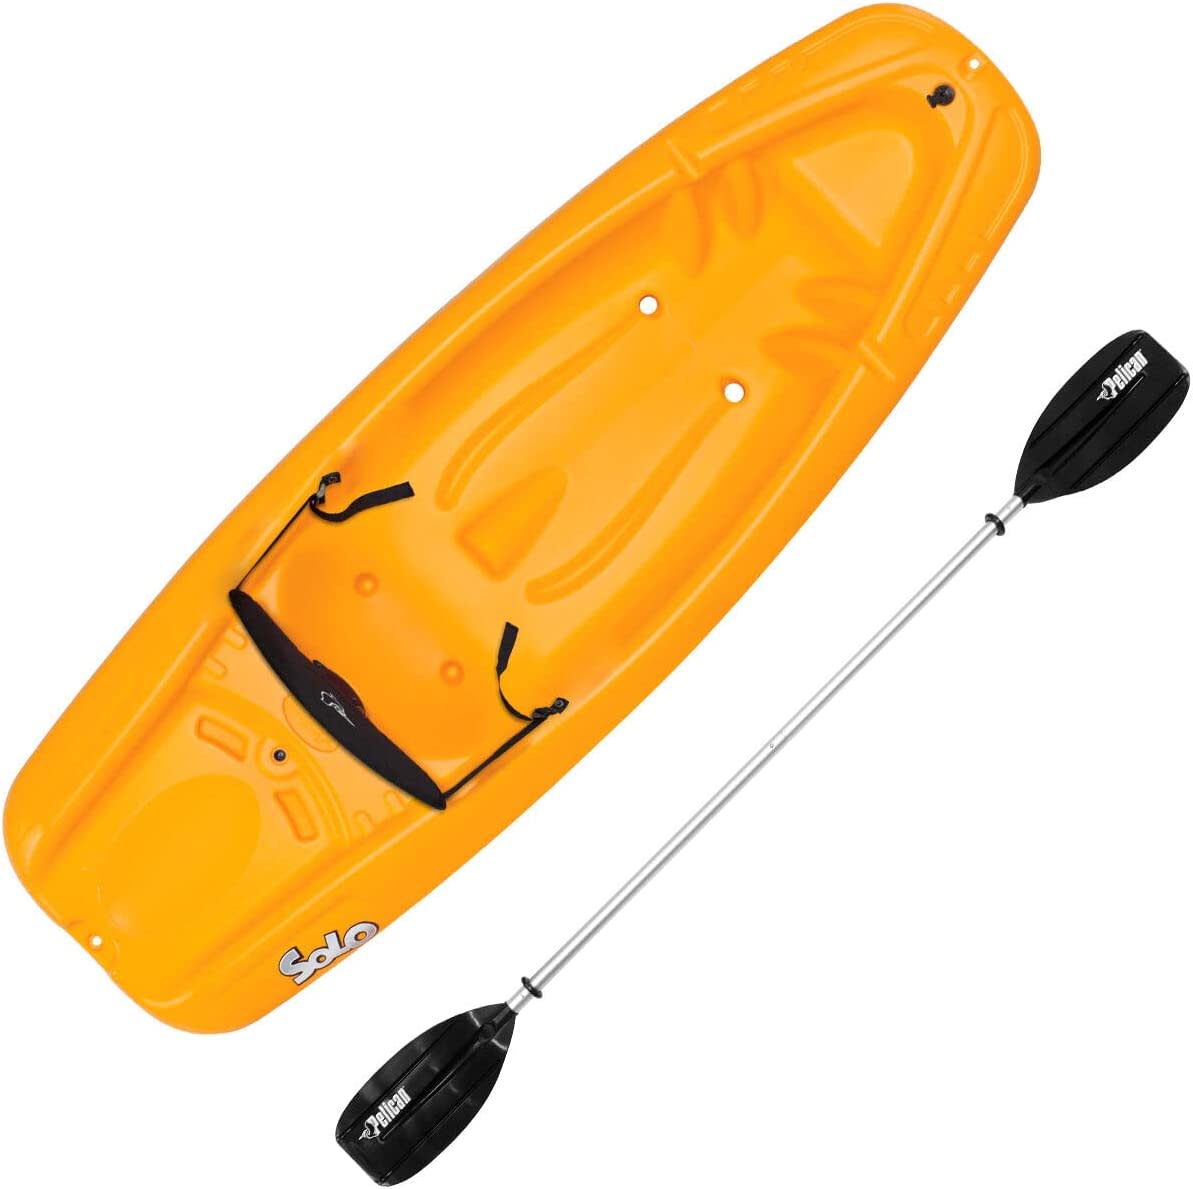 Solo 6 Feet Sit-on-top Youth Kayak - Pelican Kids Kayak - Perfect for Kids Comes with Kayak Accessories